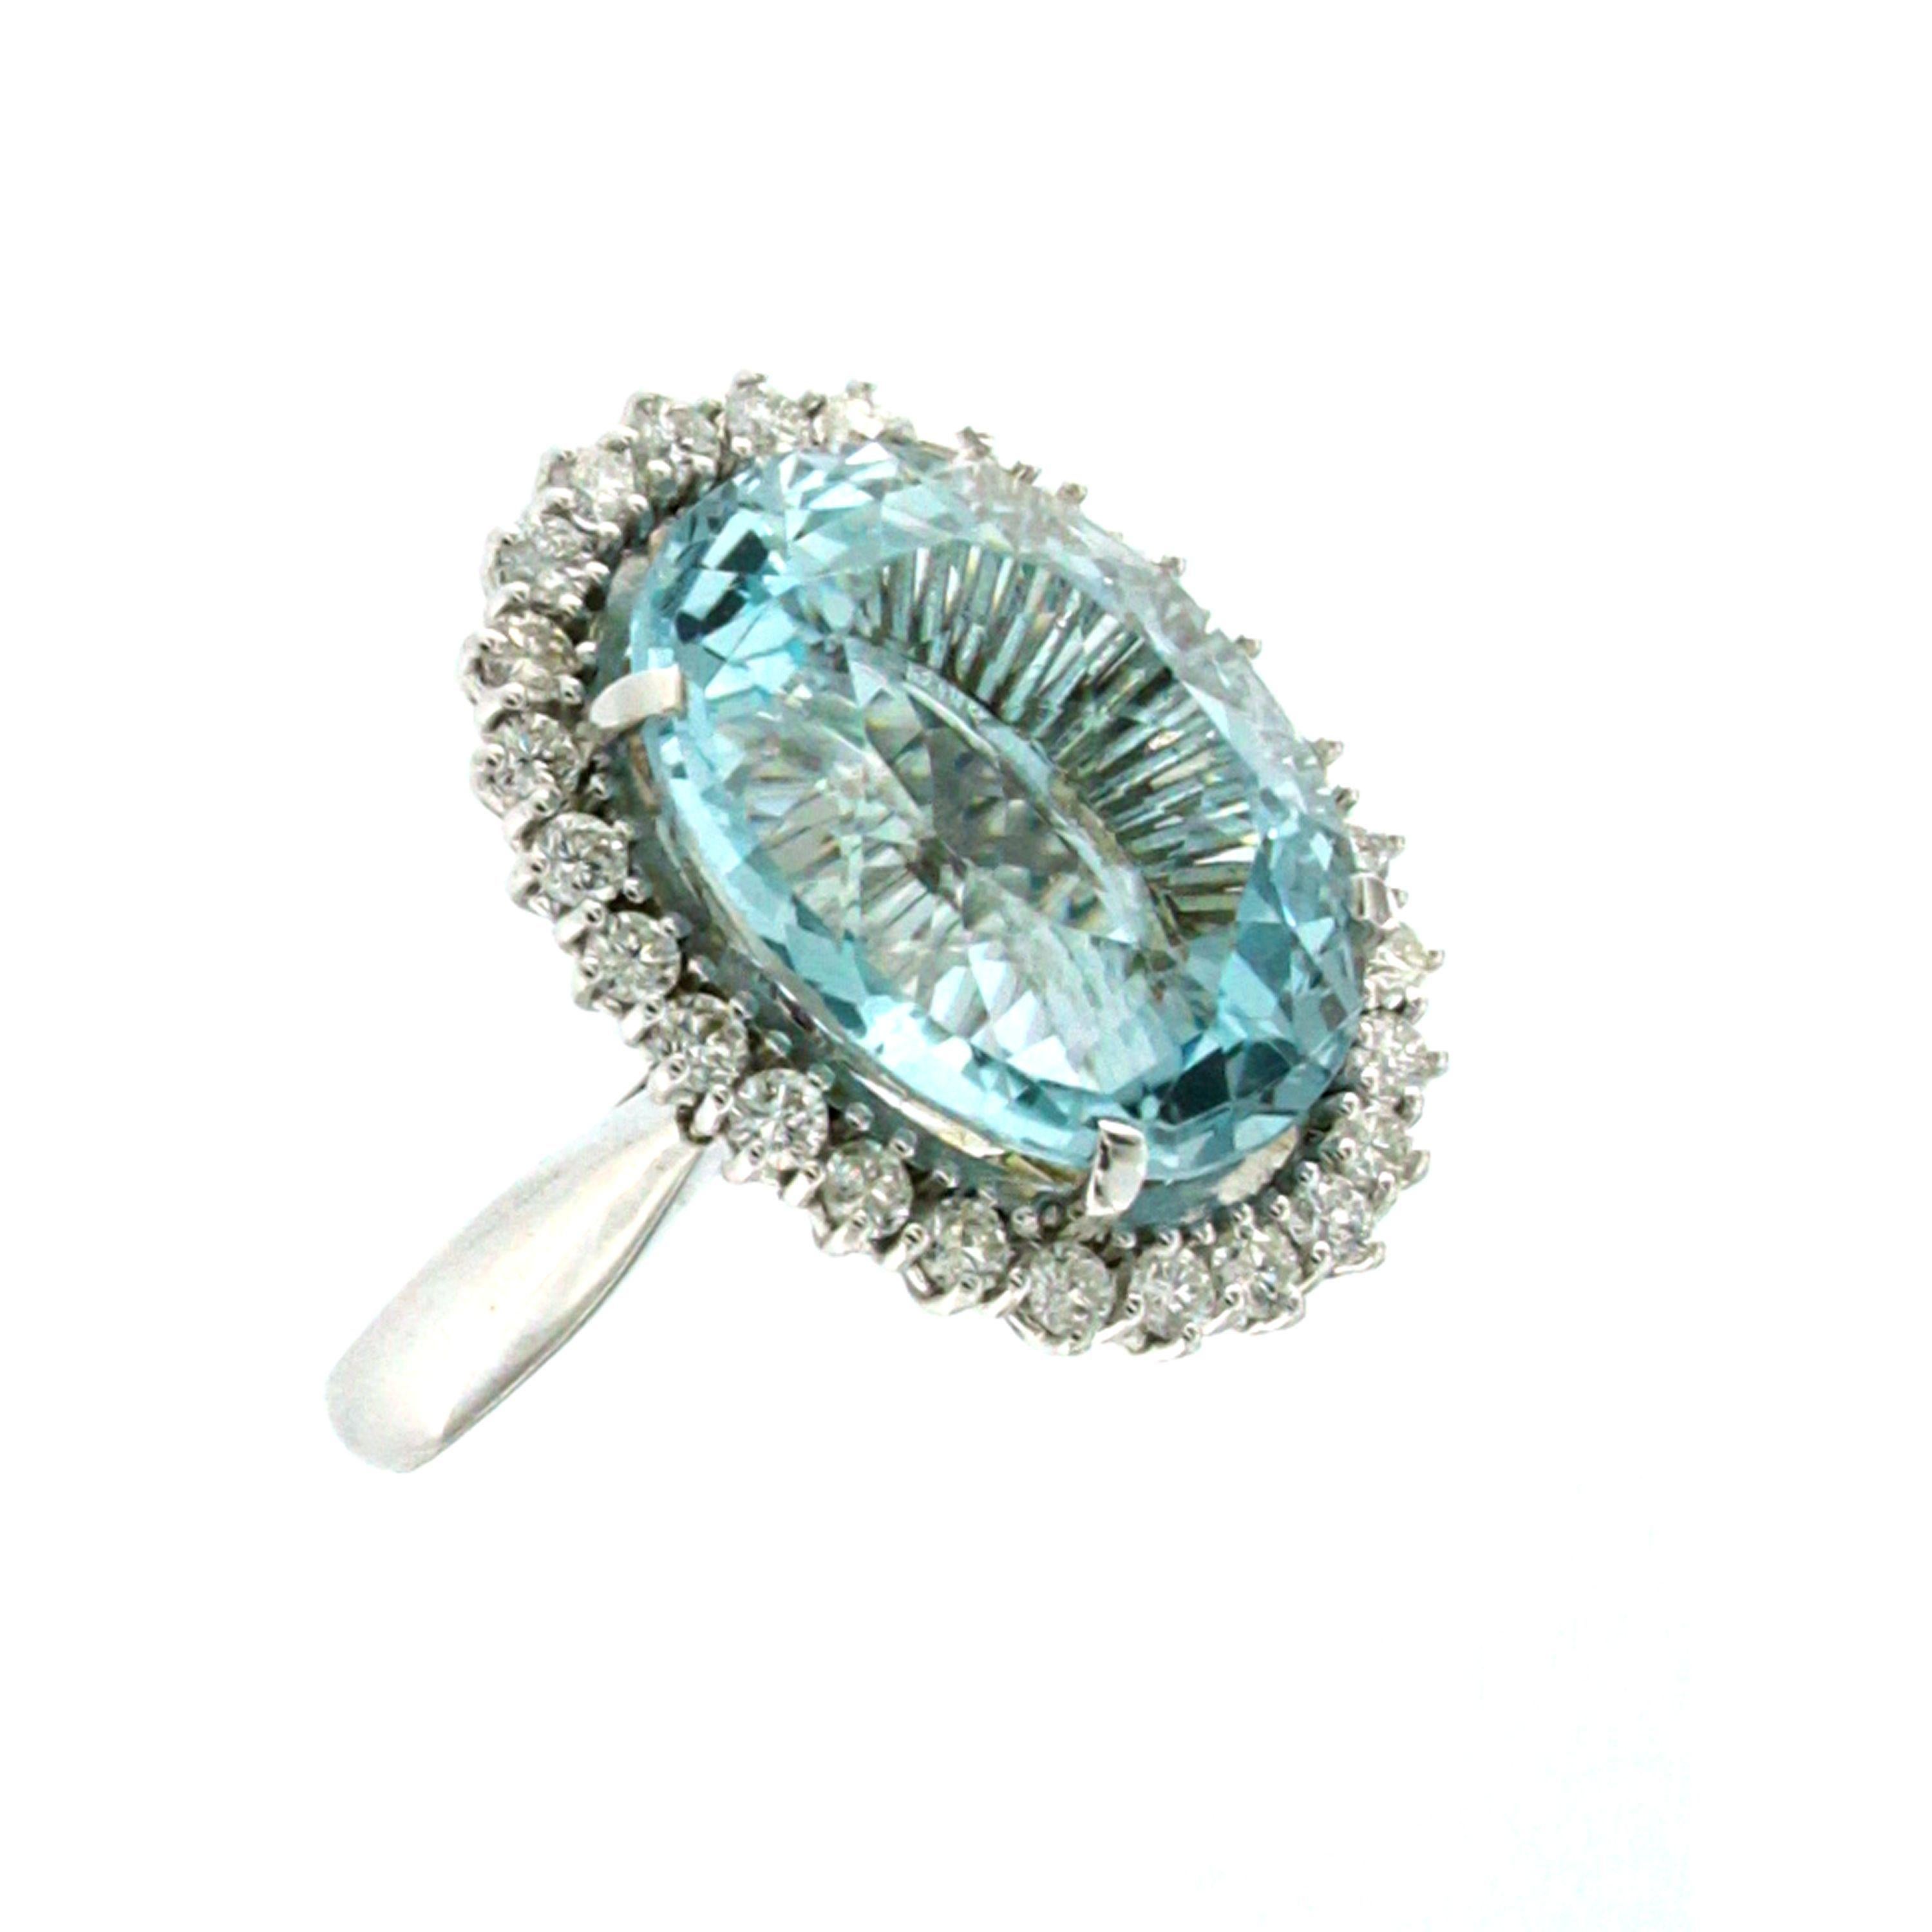 Beautiful and unusual Ring hand crafted in 18k white gold set with a natural and sparkling Aquamarine of 16,81 carat 18,3 x 15,2 mm and surrounded by approx. 1,00 carat of colorless round brilliant cut diamonds graded G color Vvs.

CONDITION: